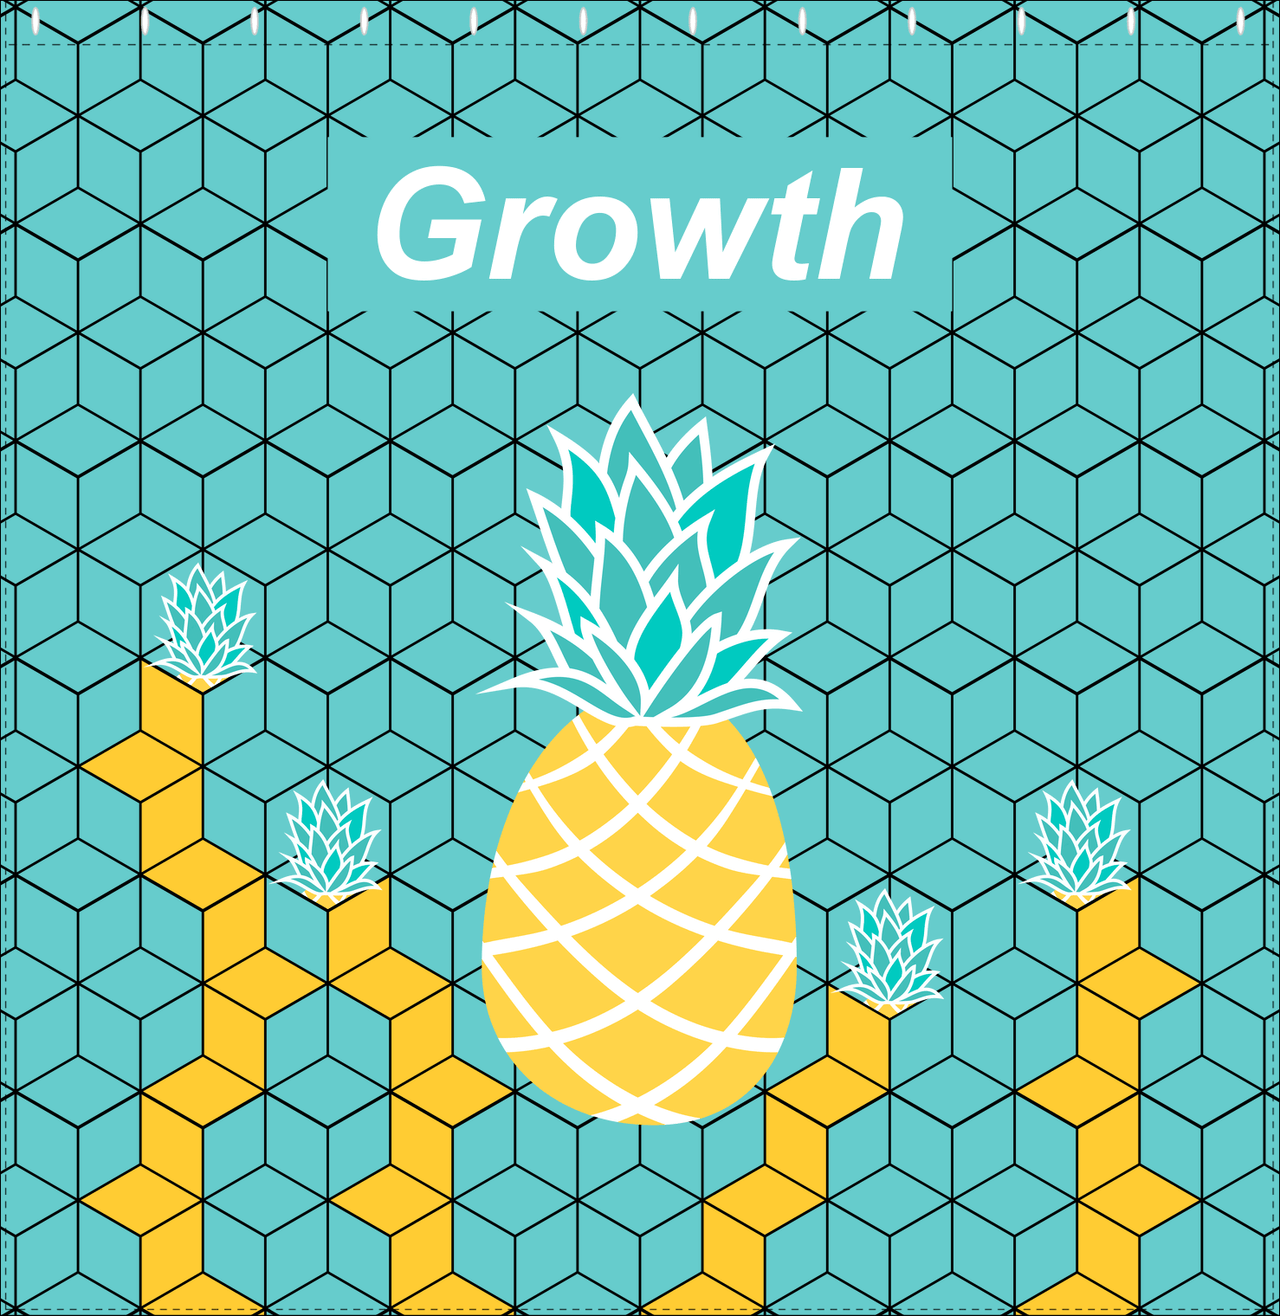 Personalized Pineapple Shower Curtain - Steps to Growth - Decorate View